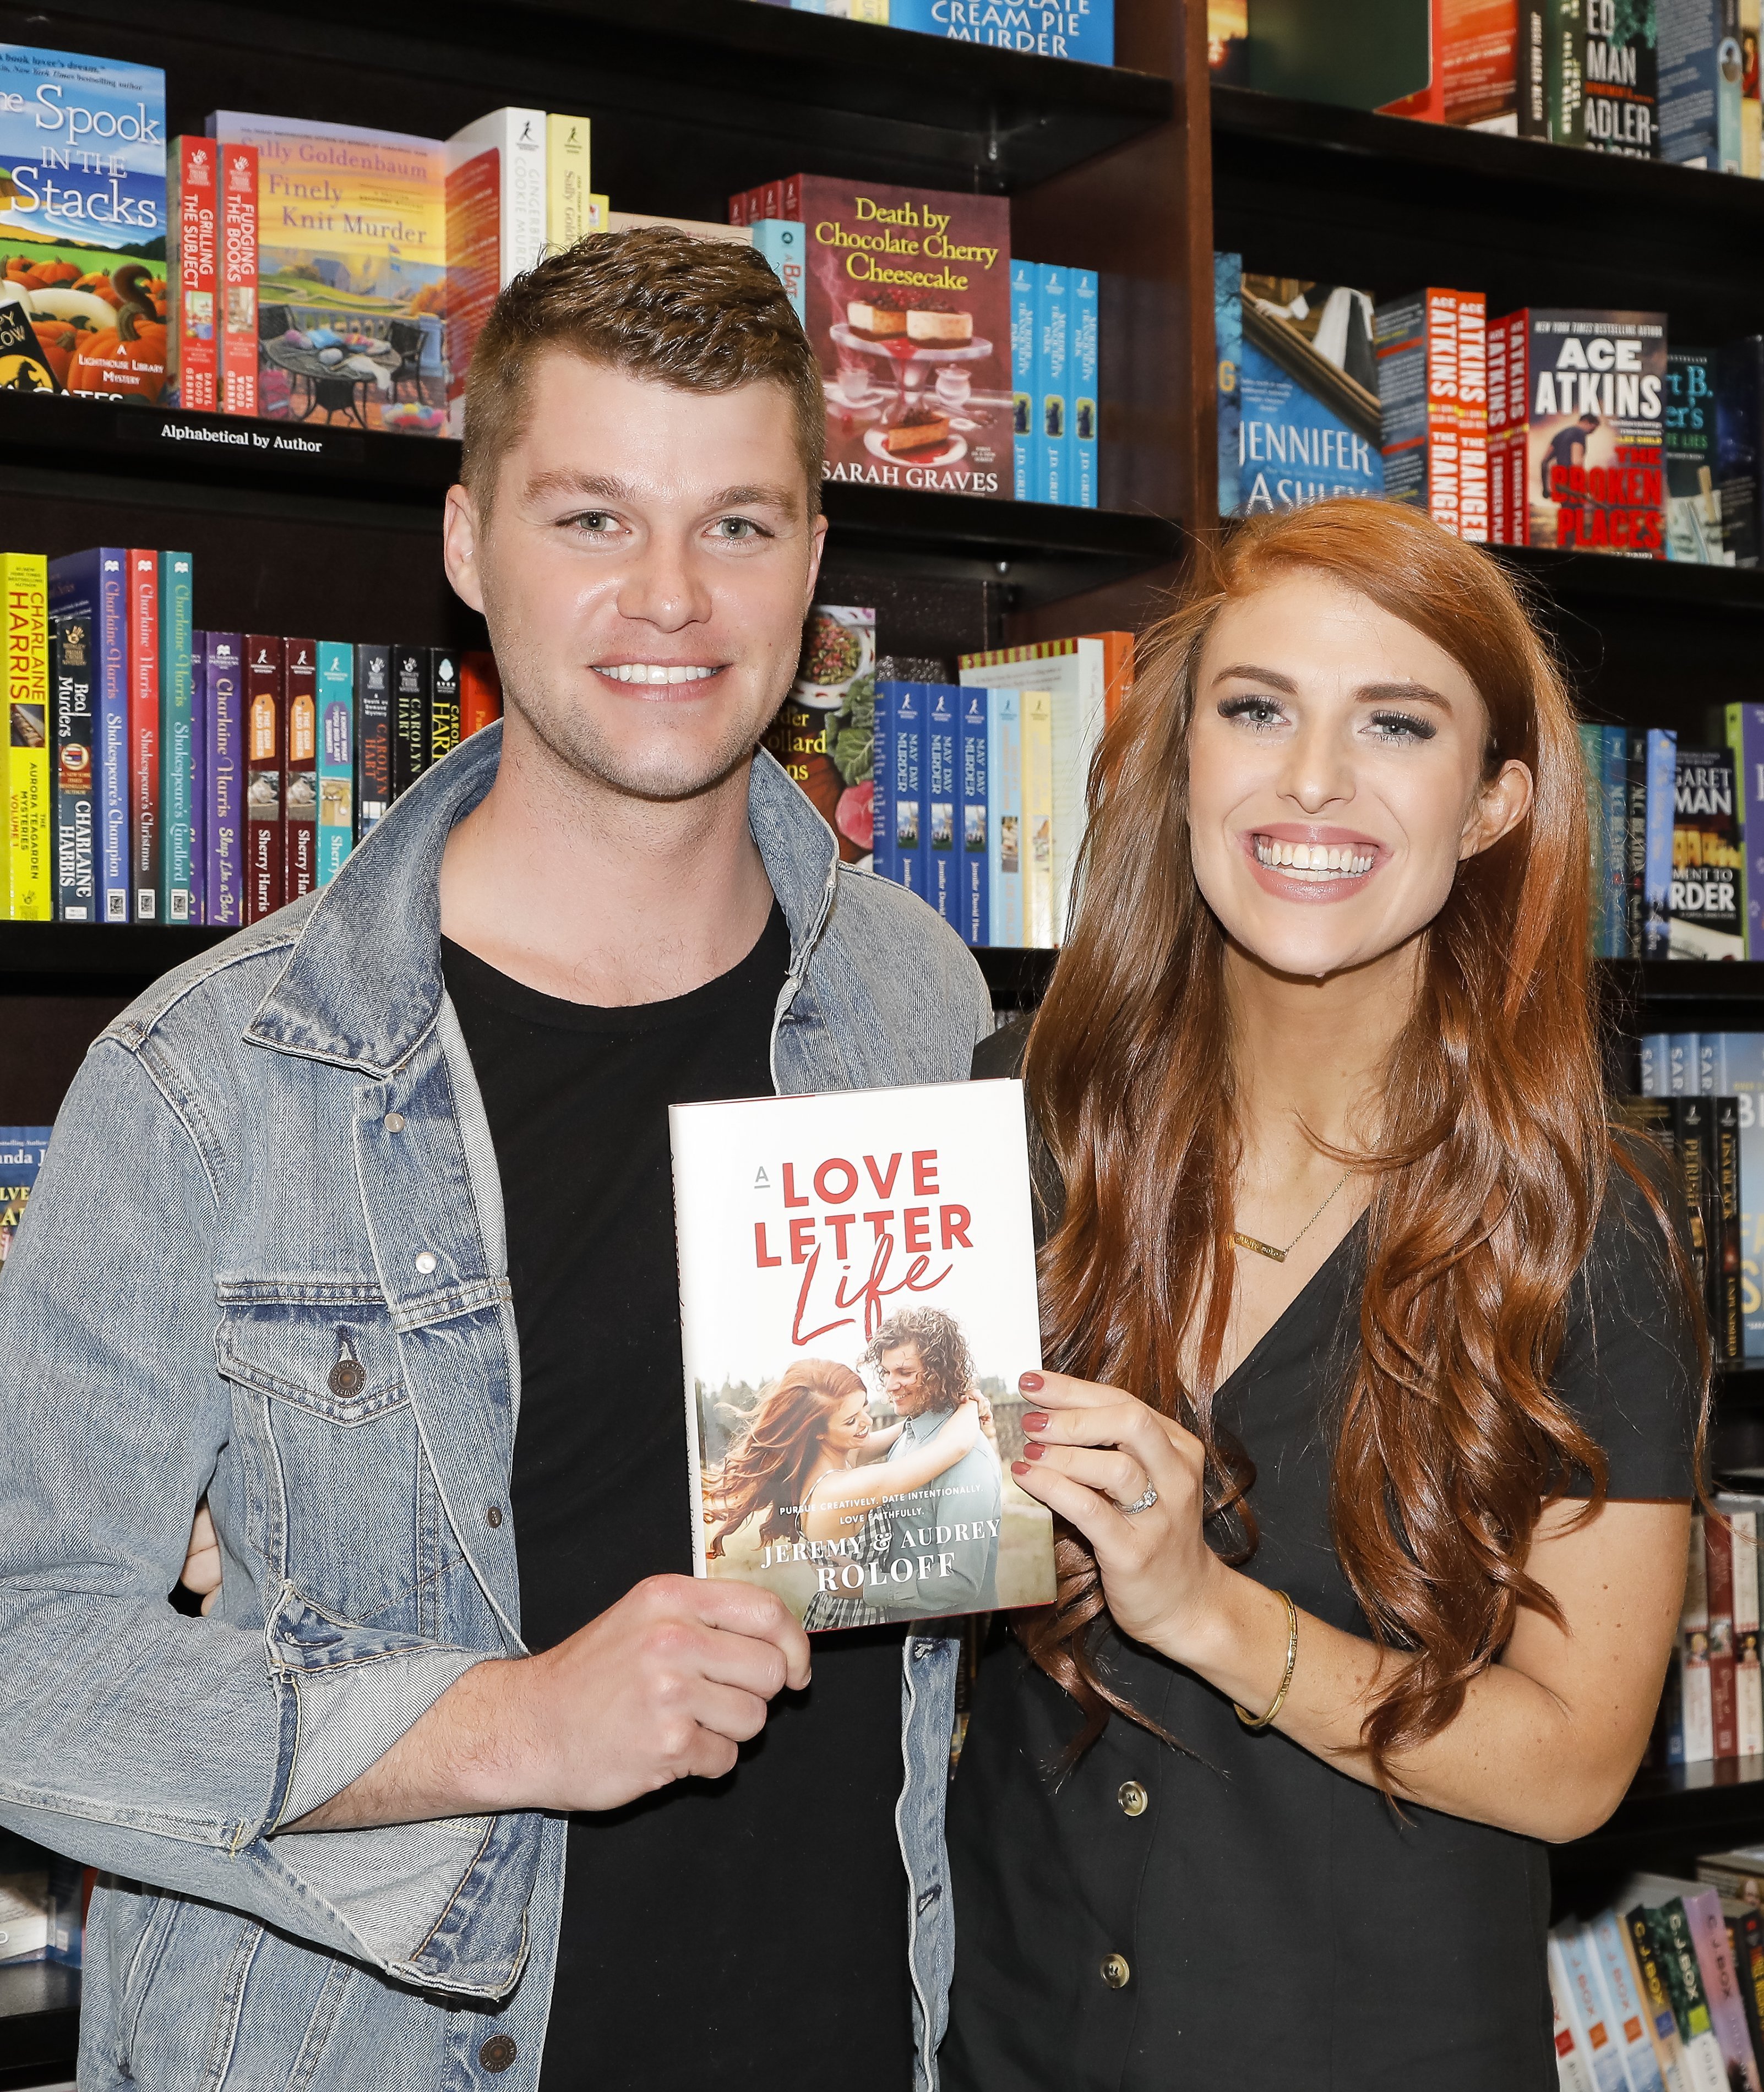 Jeremy Roloff and Audrey Roloff celebrate their new book 'A Love Letter Life' at Barnes & Noble at The Grove on April 10, 2019 | Photo: Getty Images